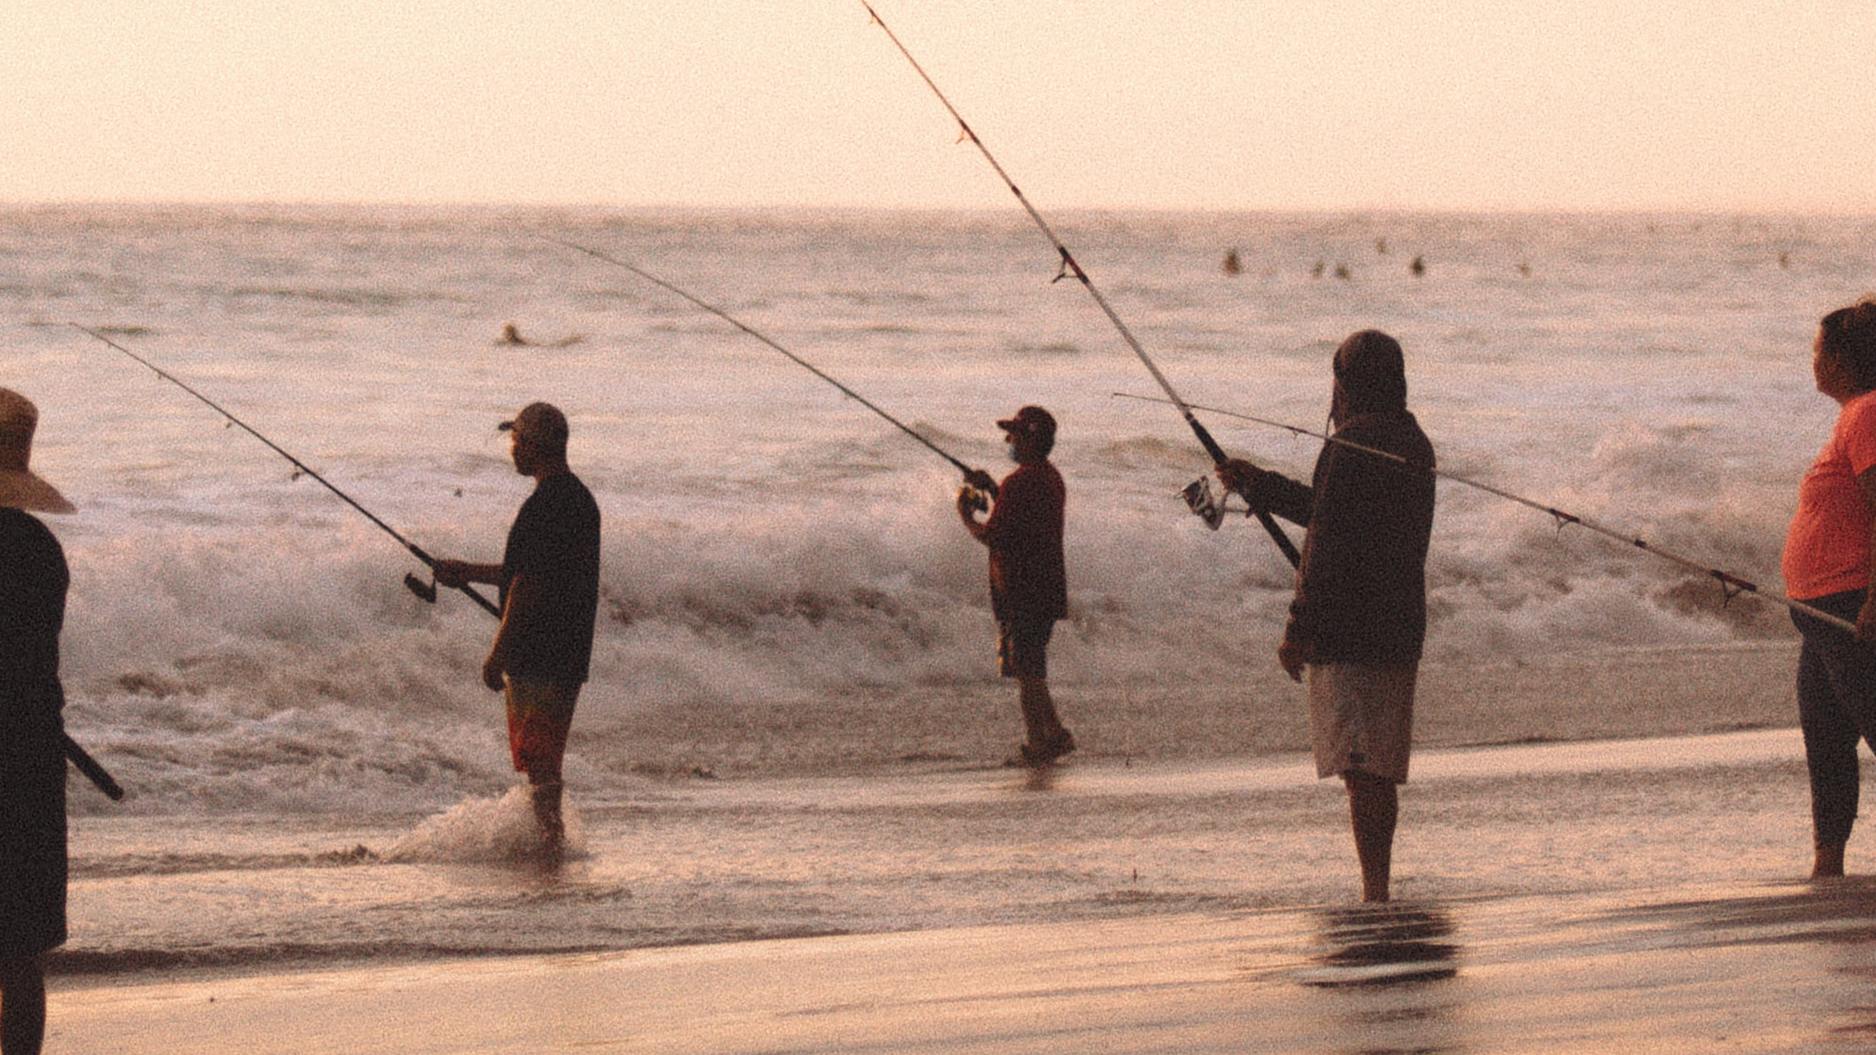 Five anglers stand in the waves and fish on the sea.